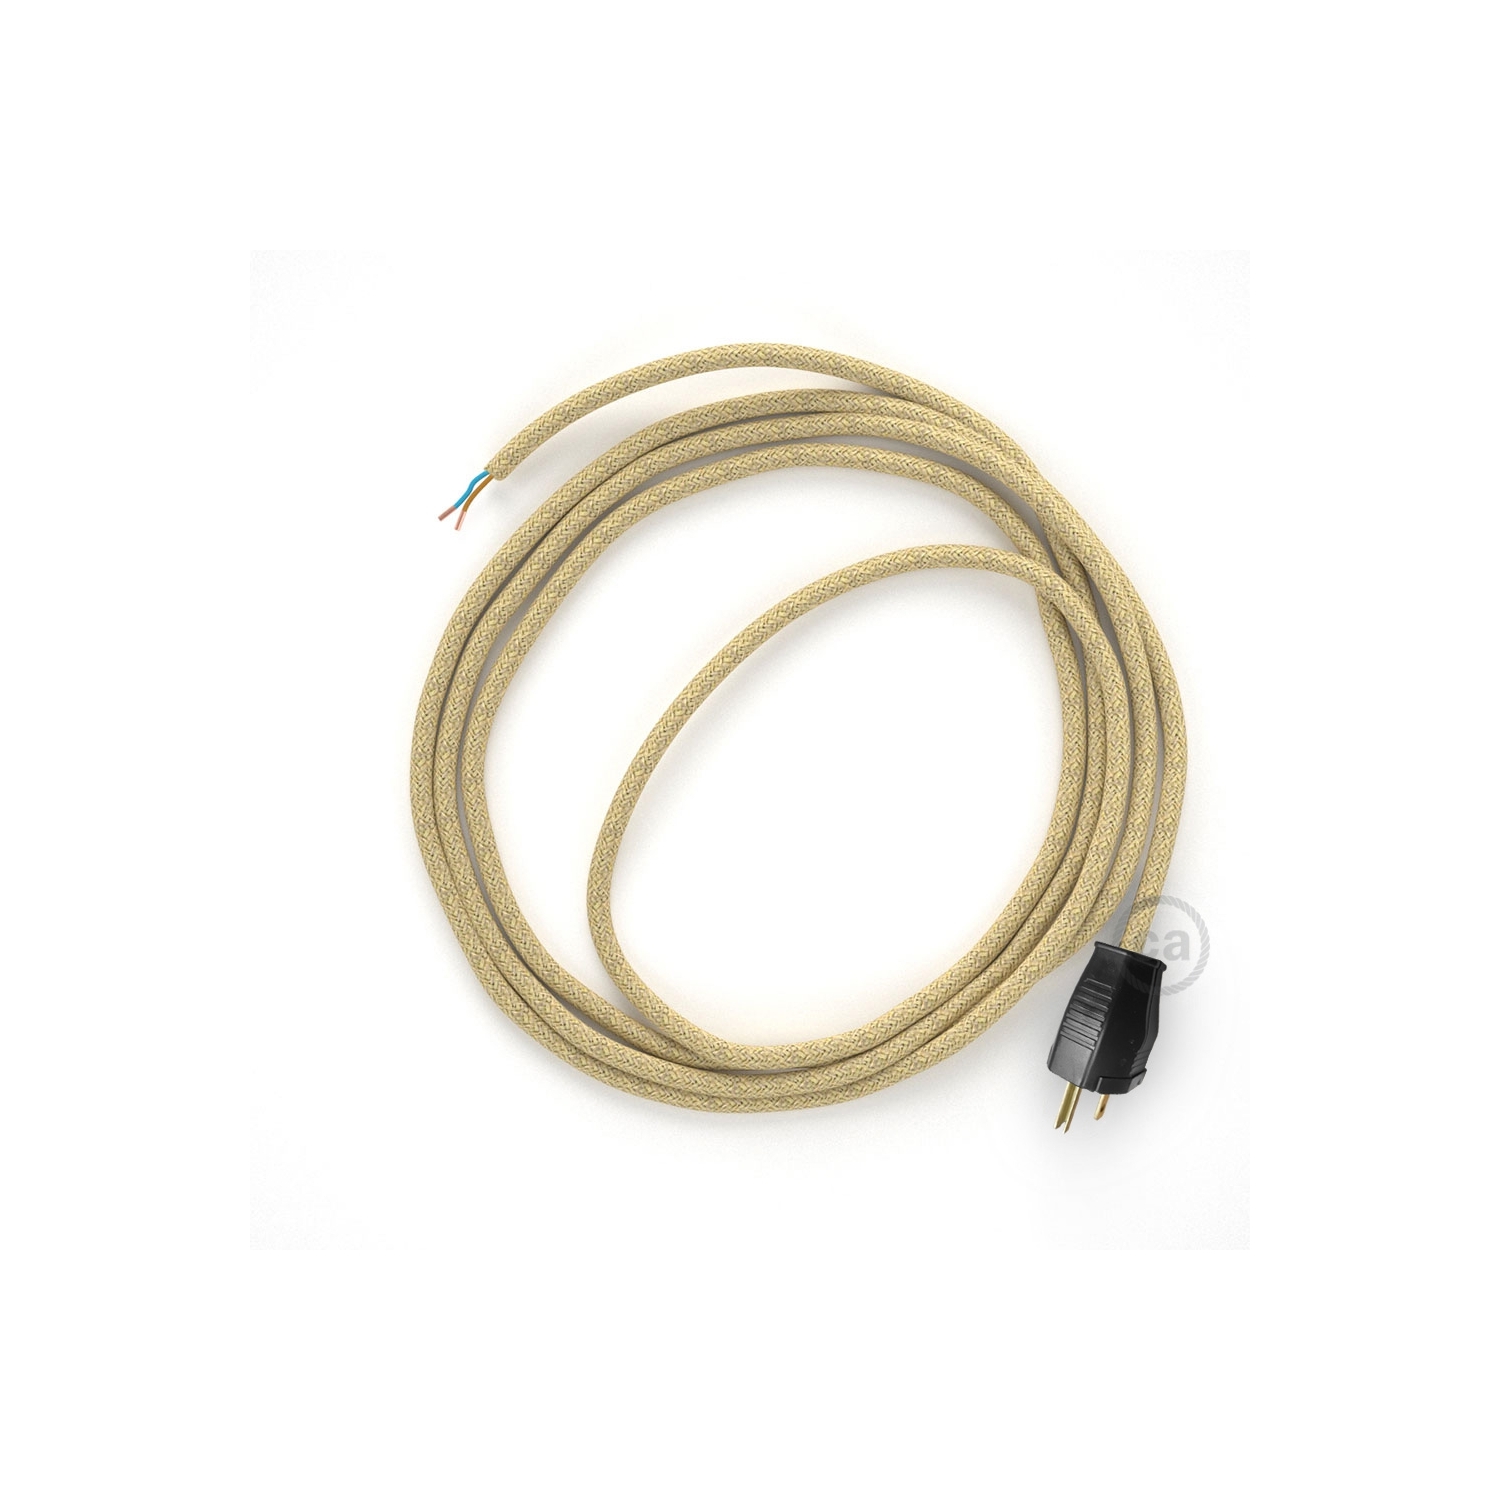 Cord-set - RN06 Jute Covered Round Cable